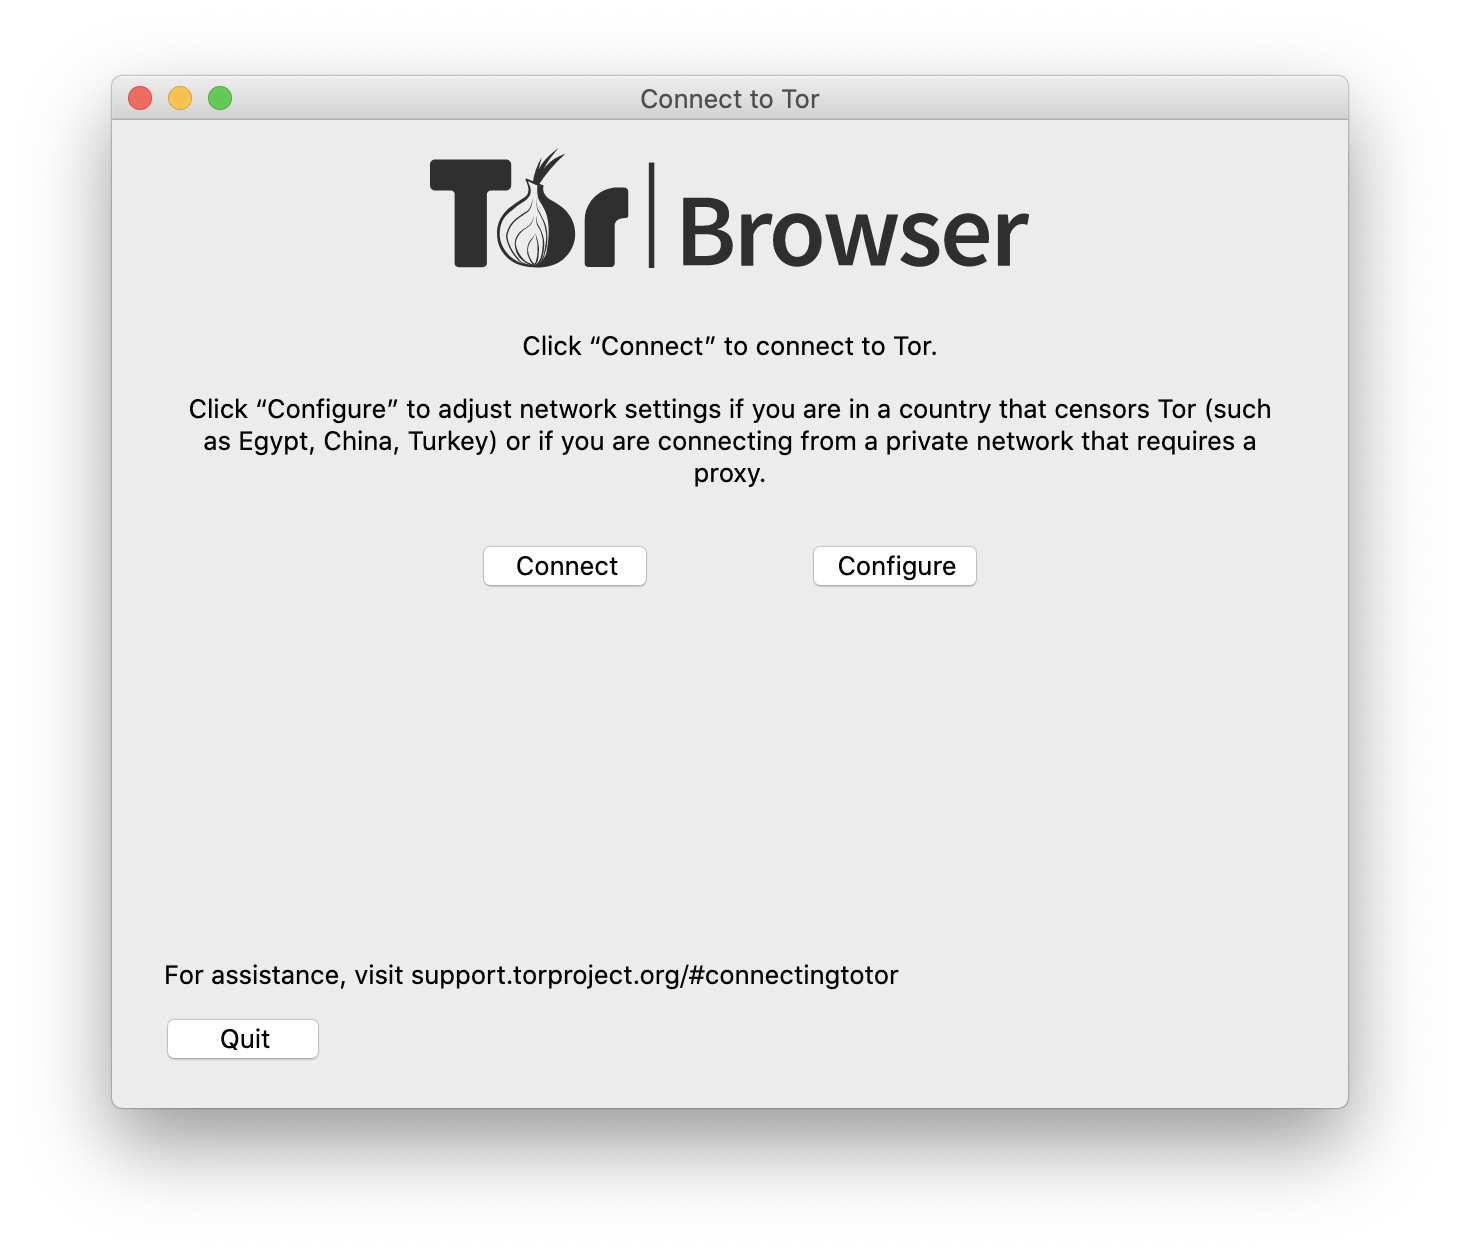 A screen capture of Tor's Network Settings page, which offers users extra choices via a "Configure" button if their Internet connection is censored or proxied.